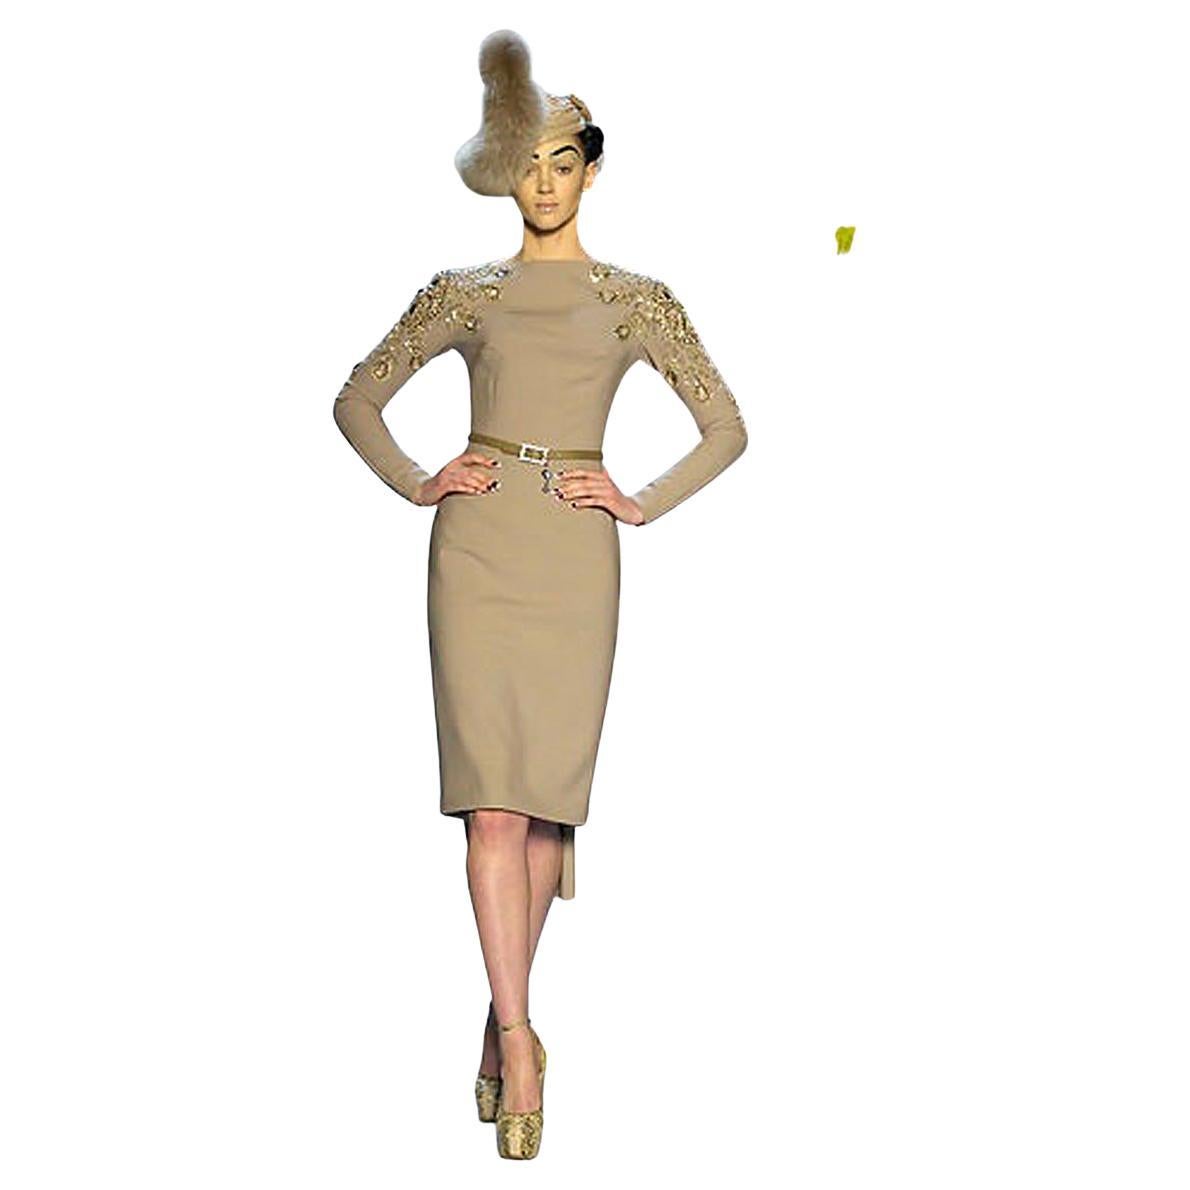 The 2007 Dior collection by John Galliano celebrated the 60th-year-anniversary of the Christian Dior glamourous fashion legacy.  An updated 21st century style homage to the House of Dior.  

Features long sleeve bateau neckline in camel wool  with a